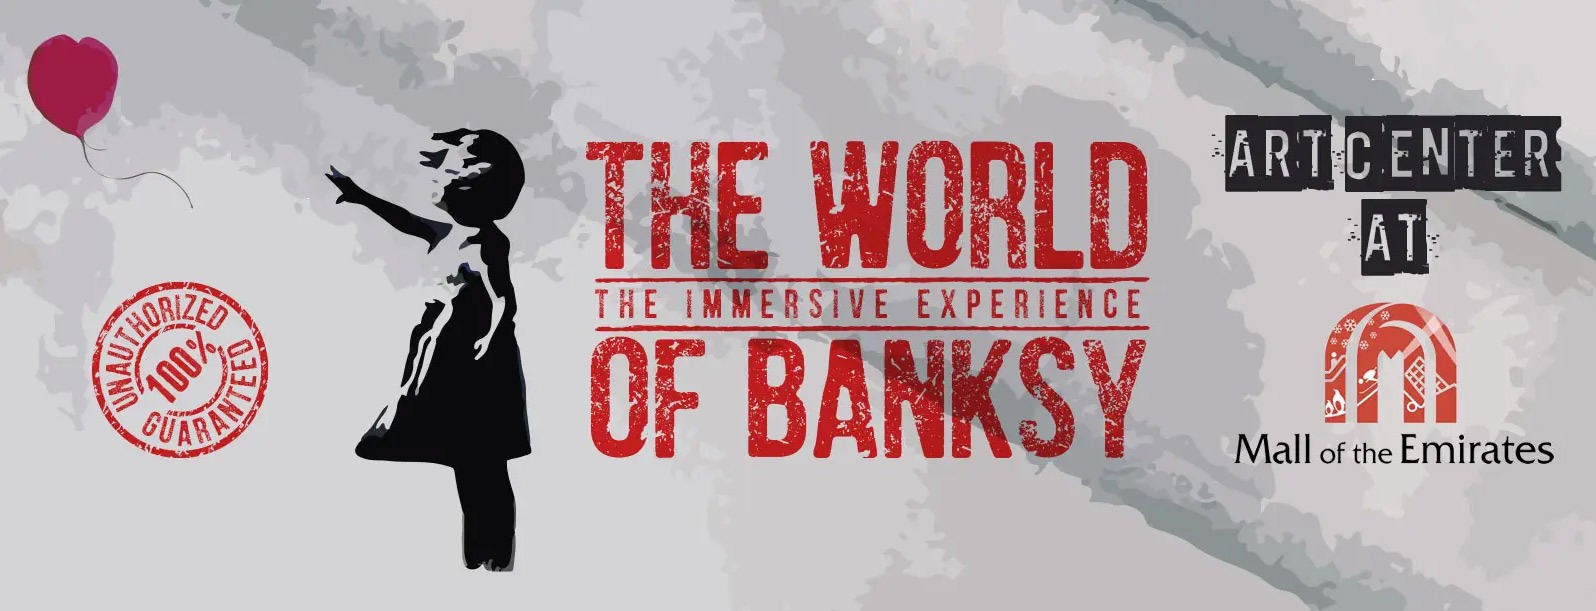 The World of Banksy – The Immersive Experience at Mall of the Emirates - Coming Soon in UAE